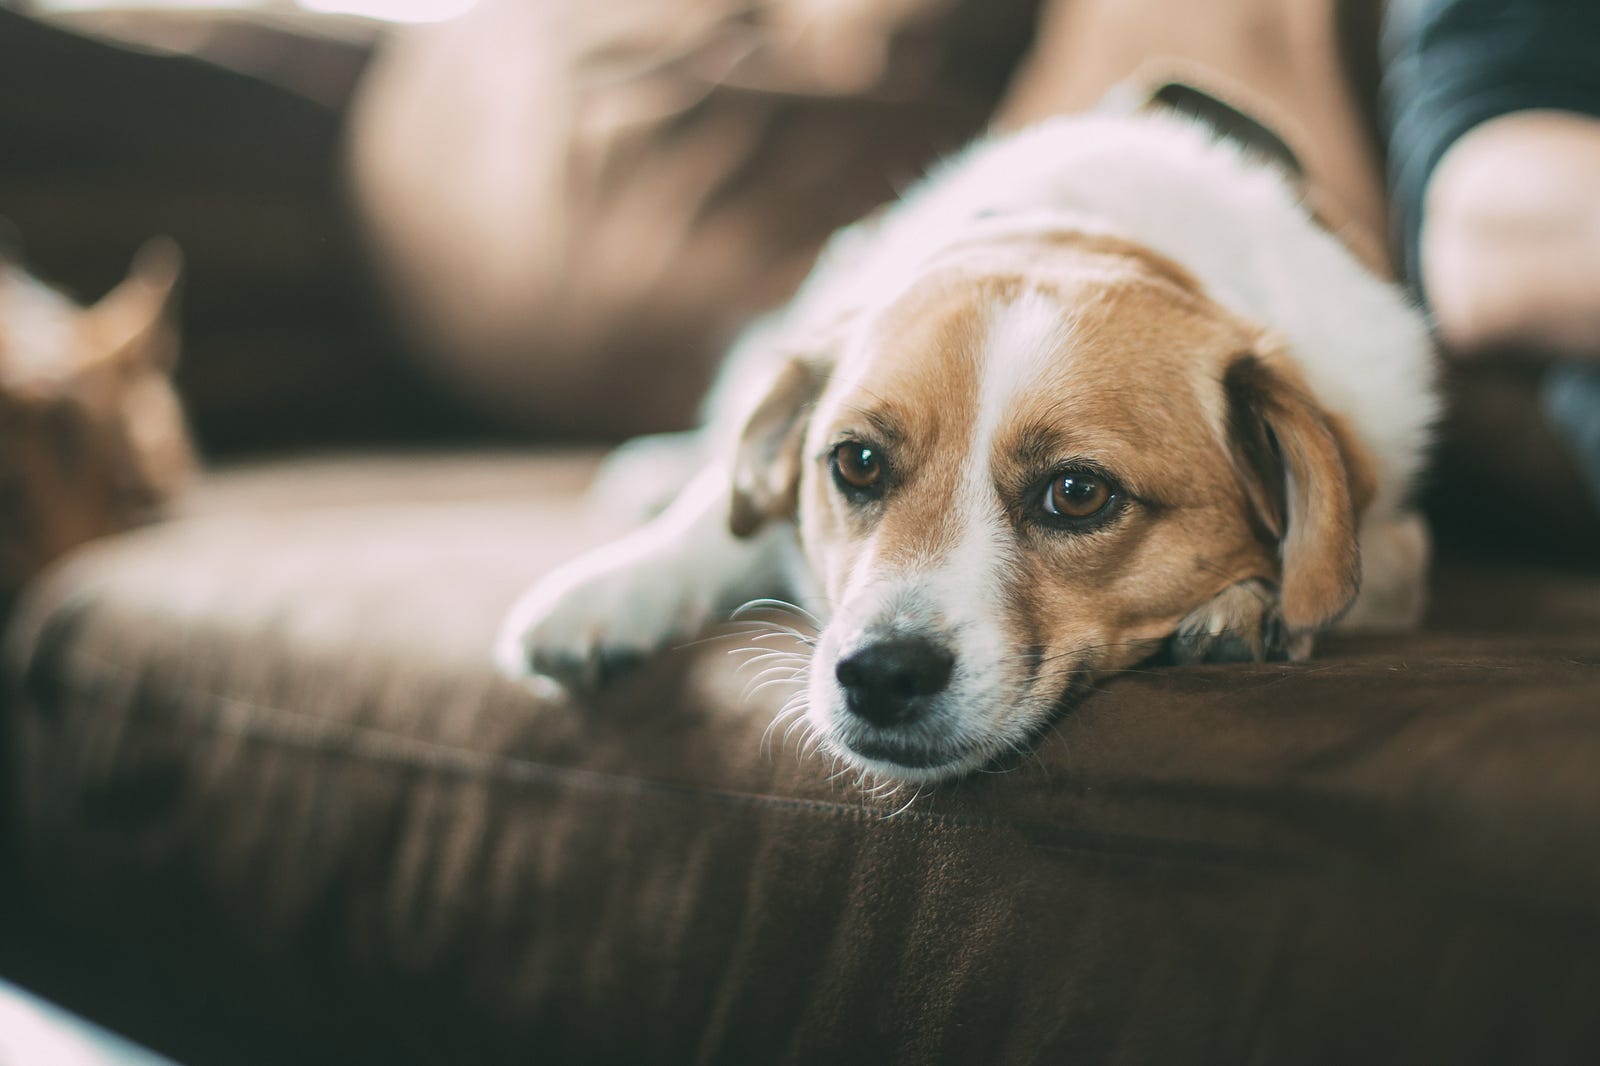 A small brown and white dog lies on a brown animal bed as it peers towards us. Research has shown that music therapy can improve heart health by reducing anxiety, lowering blood pressure, and improving heart rate variability. Did you know that this approach works for dogs, too?